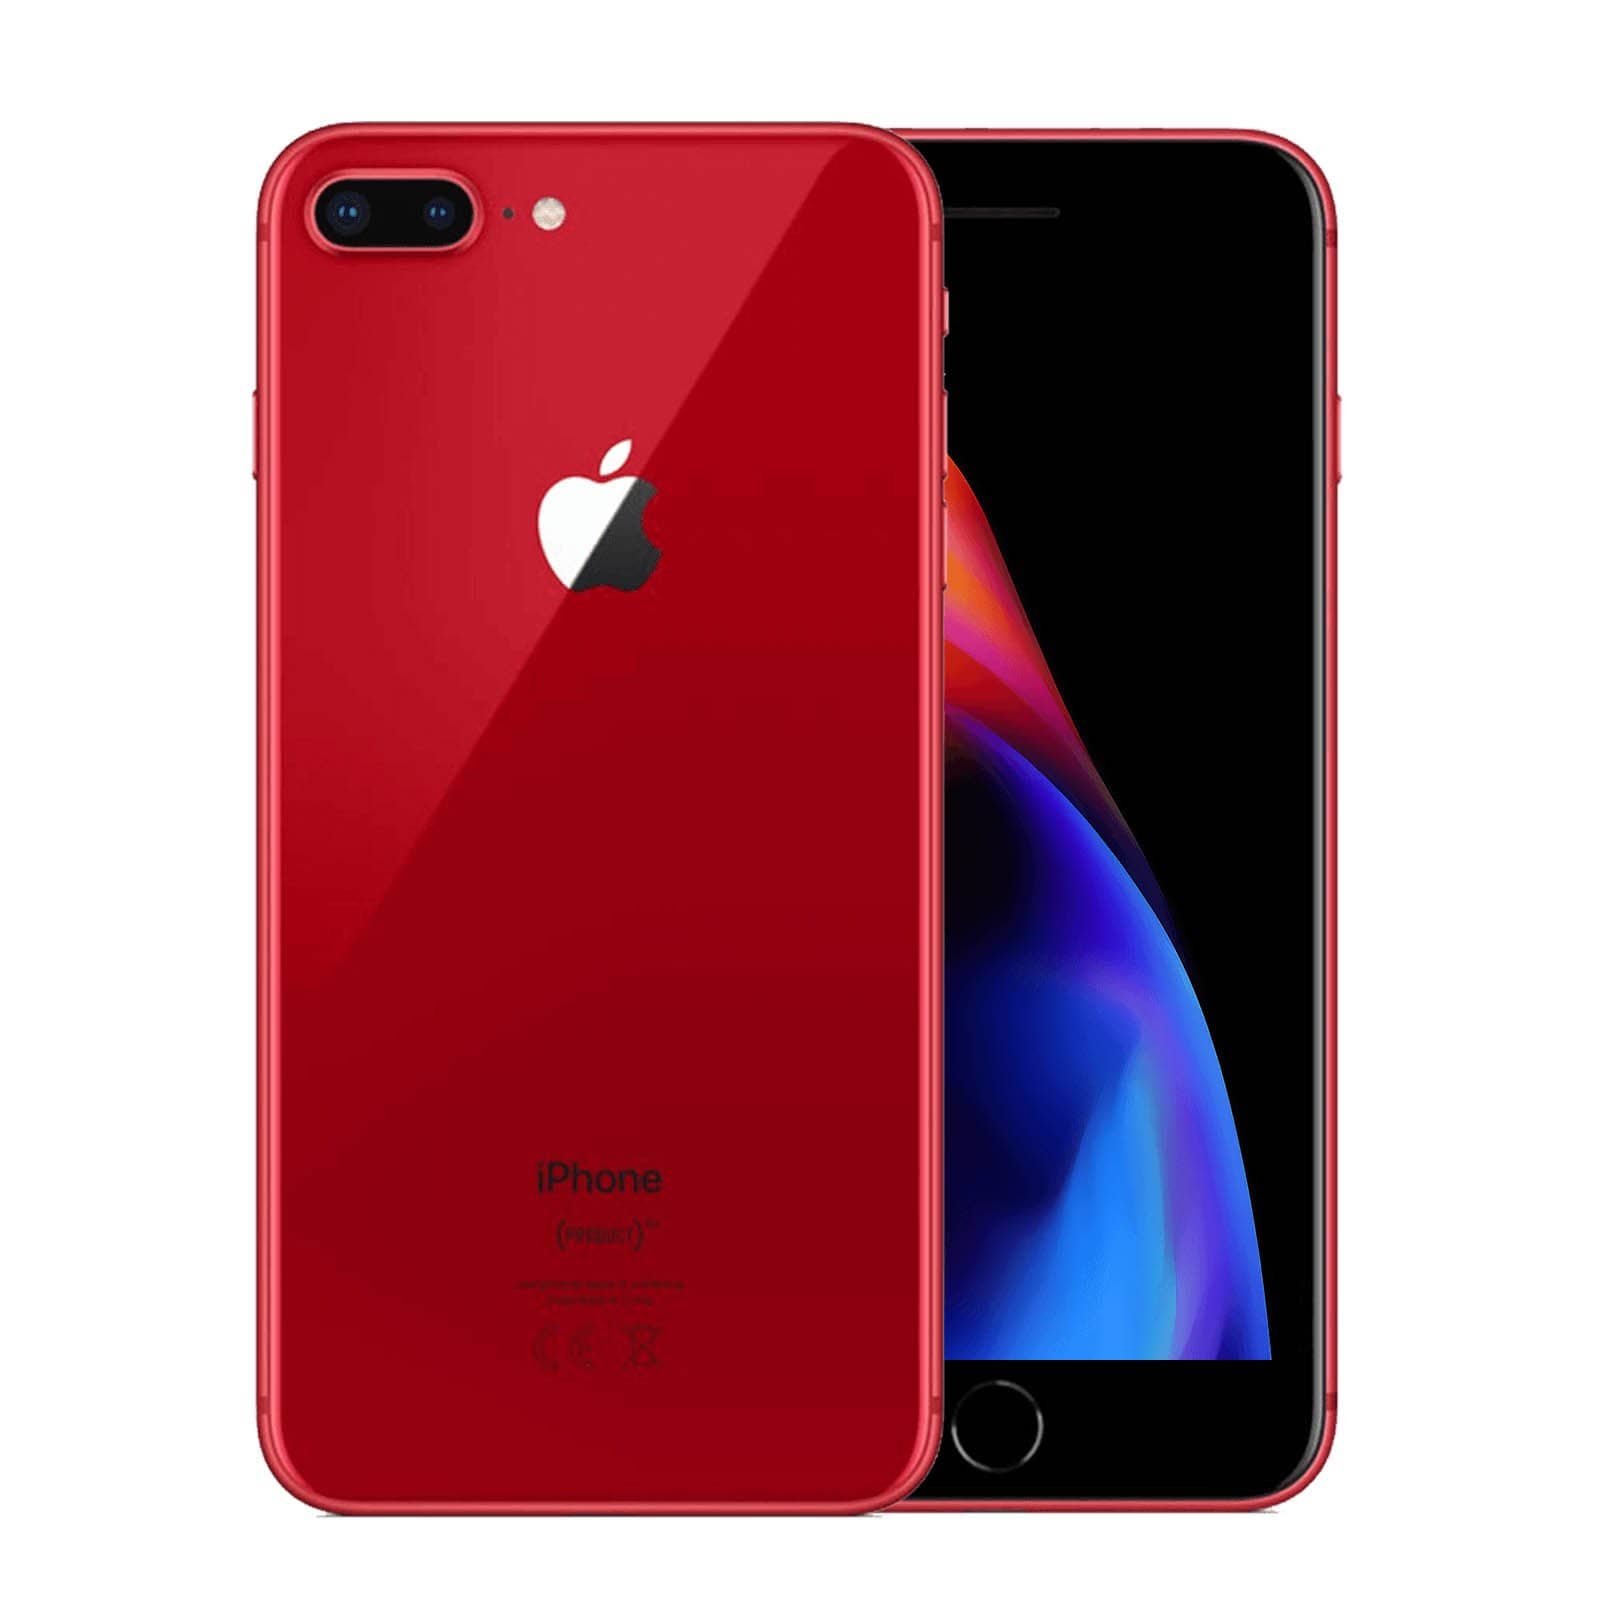 Apple iPhone 8 Plus 64GB Product Red Good - Unlocked 64GB Product Red Good